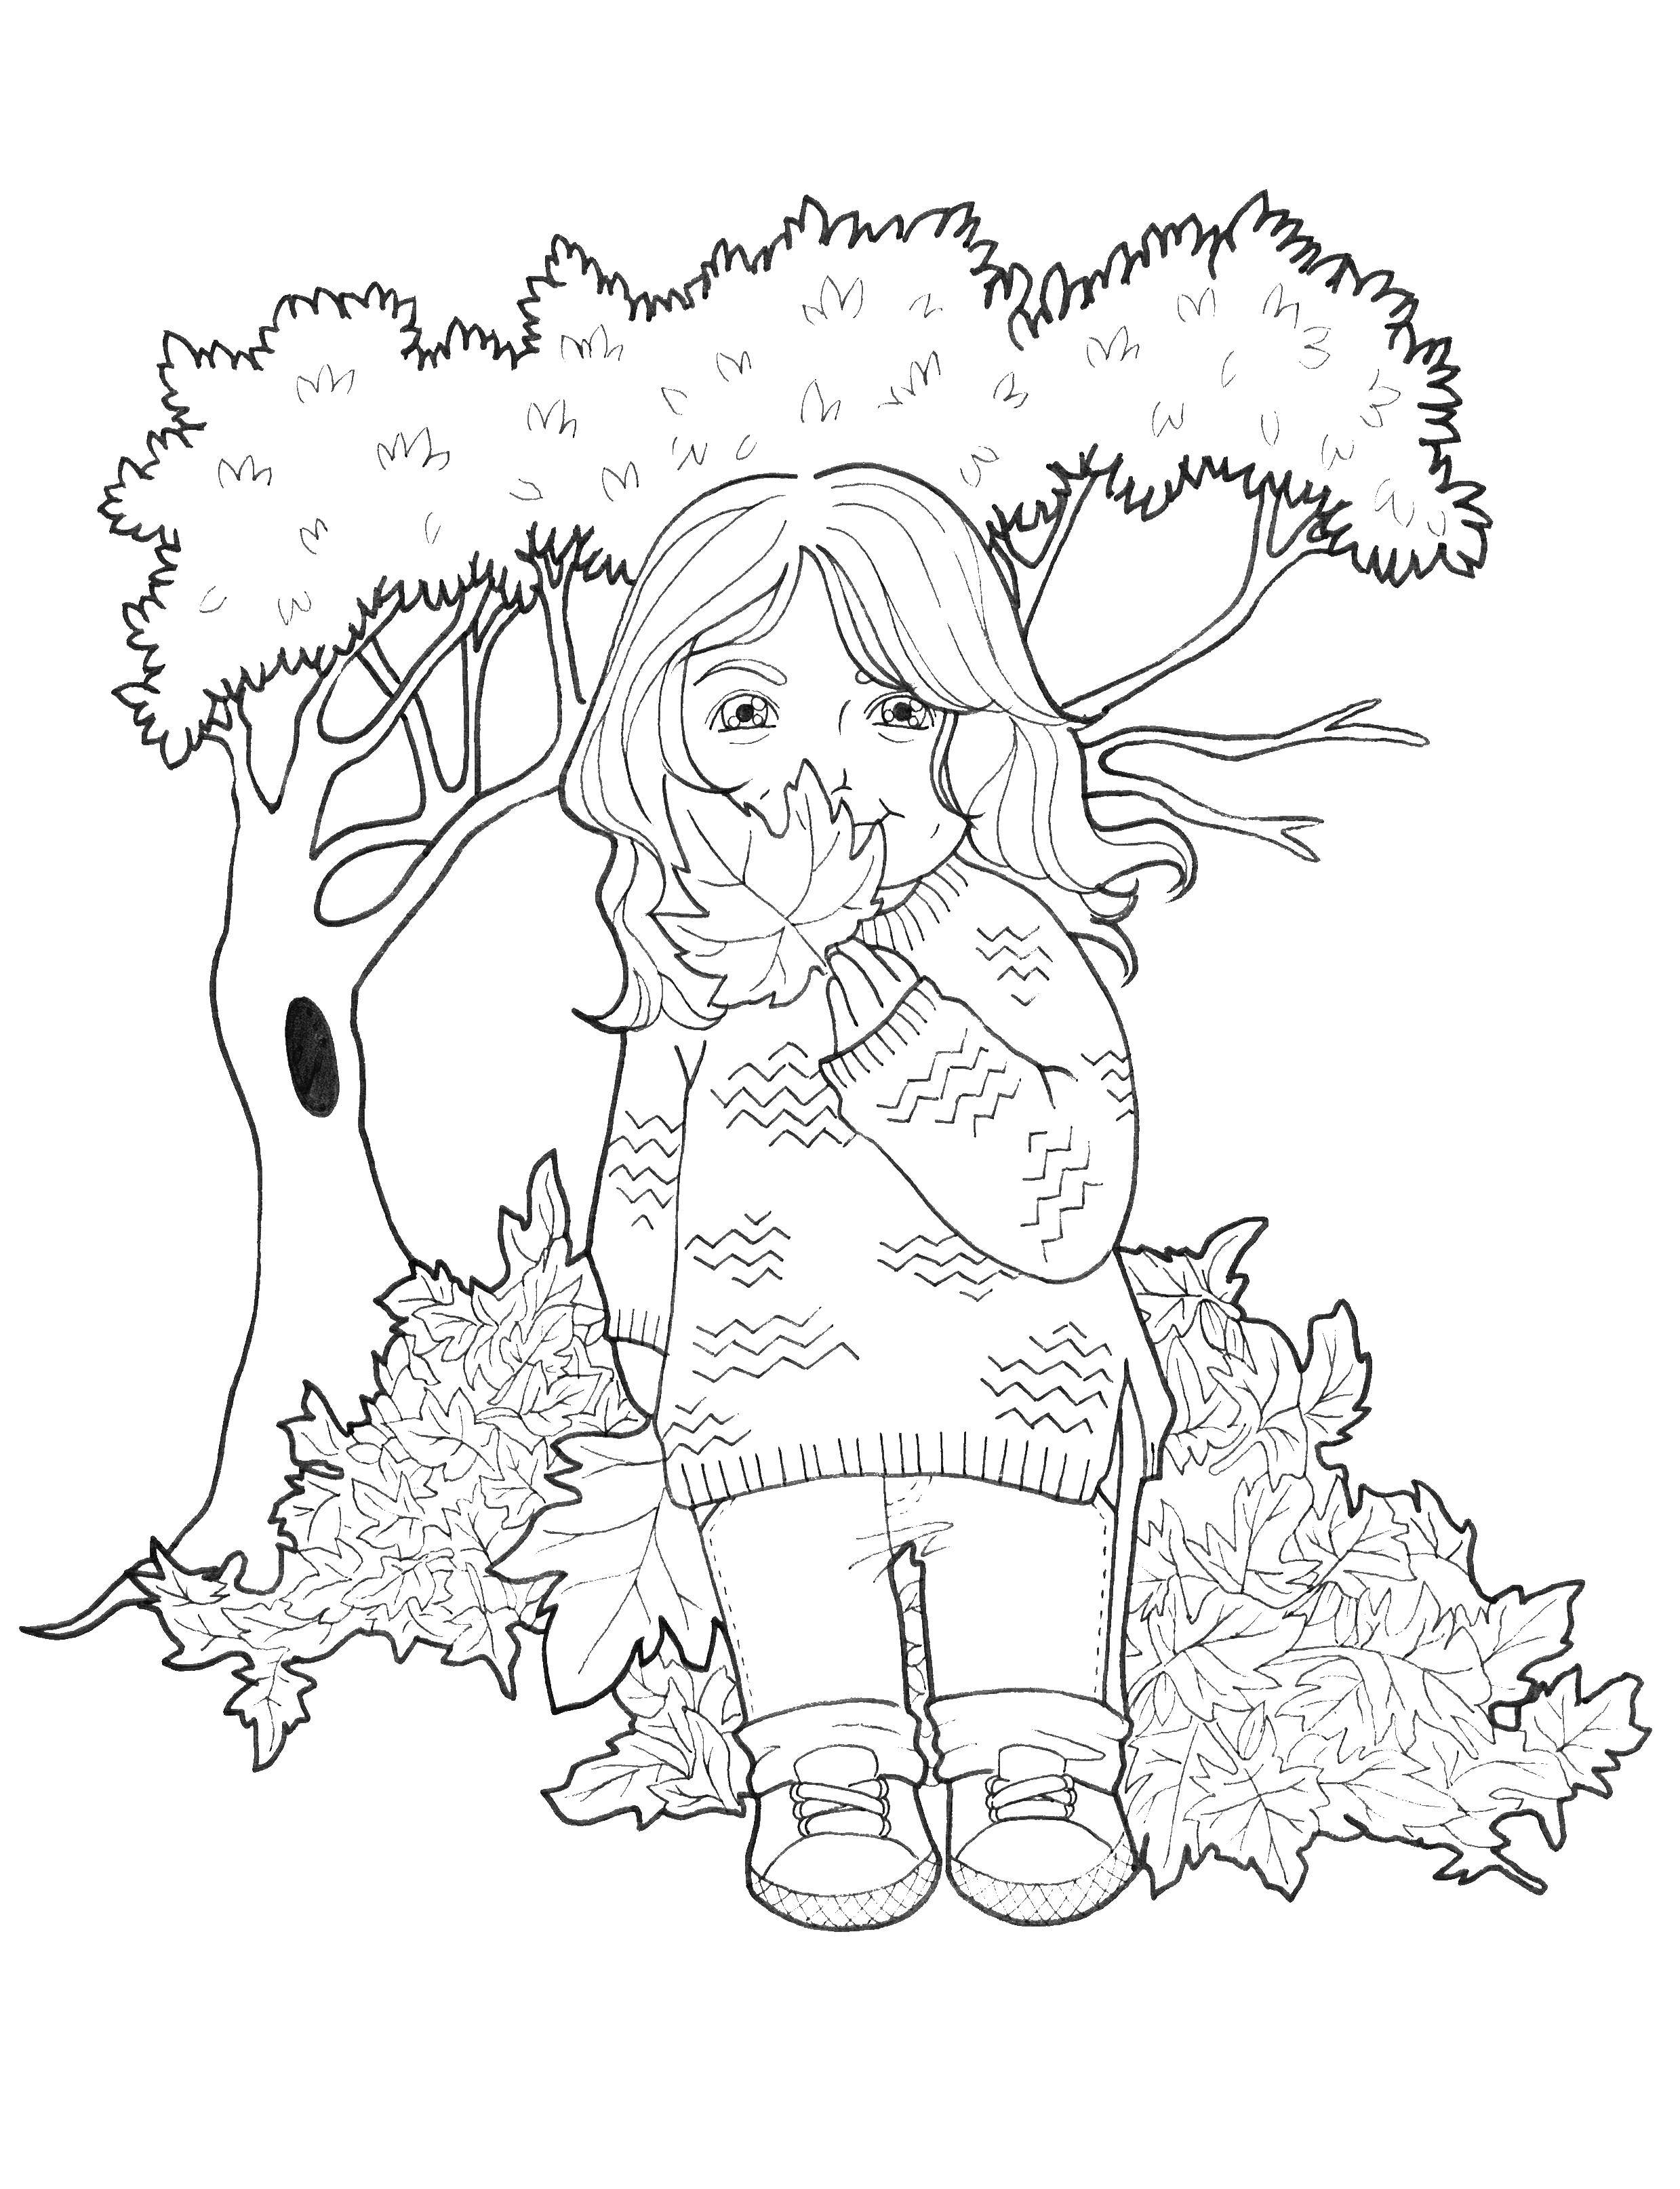 Coloring Girl collects leaves. Category Autumn leaves falling. Tags:  girl, leaves.